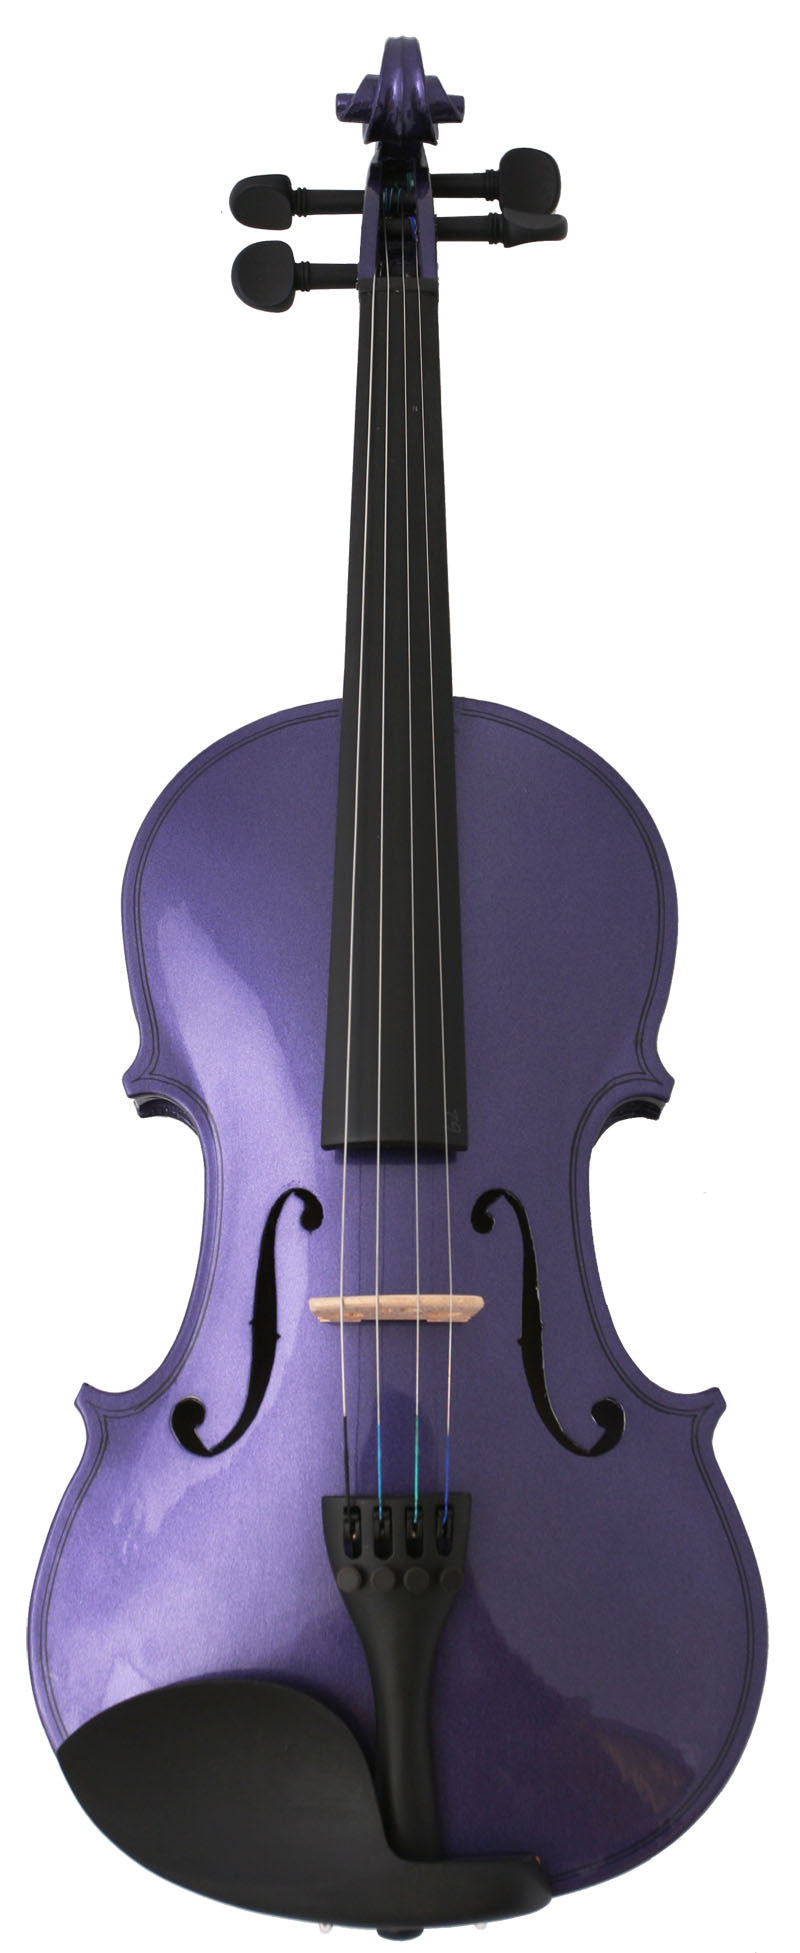 Crescent Direct Vl-prm3/4 3/4 Purple Maplewood Acoustic Violin With Case, Rosin, And Bow